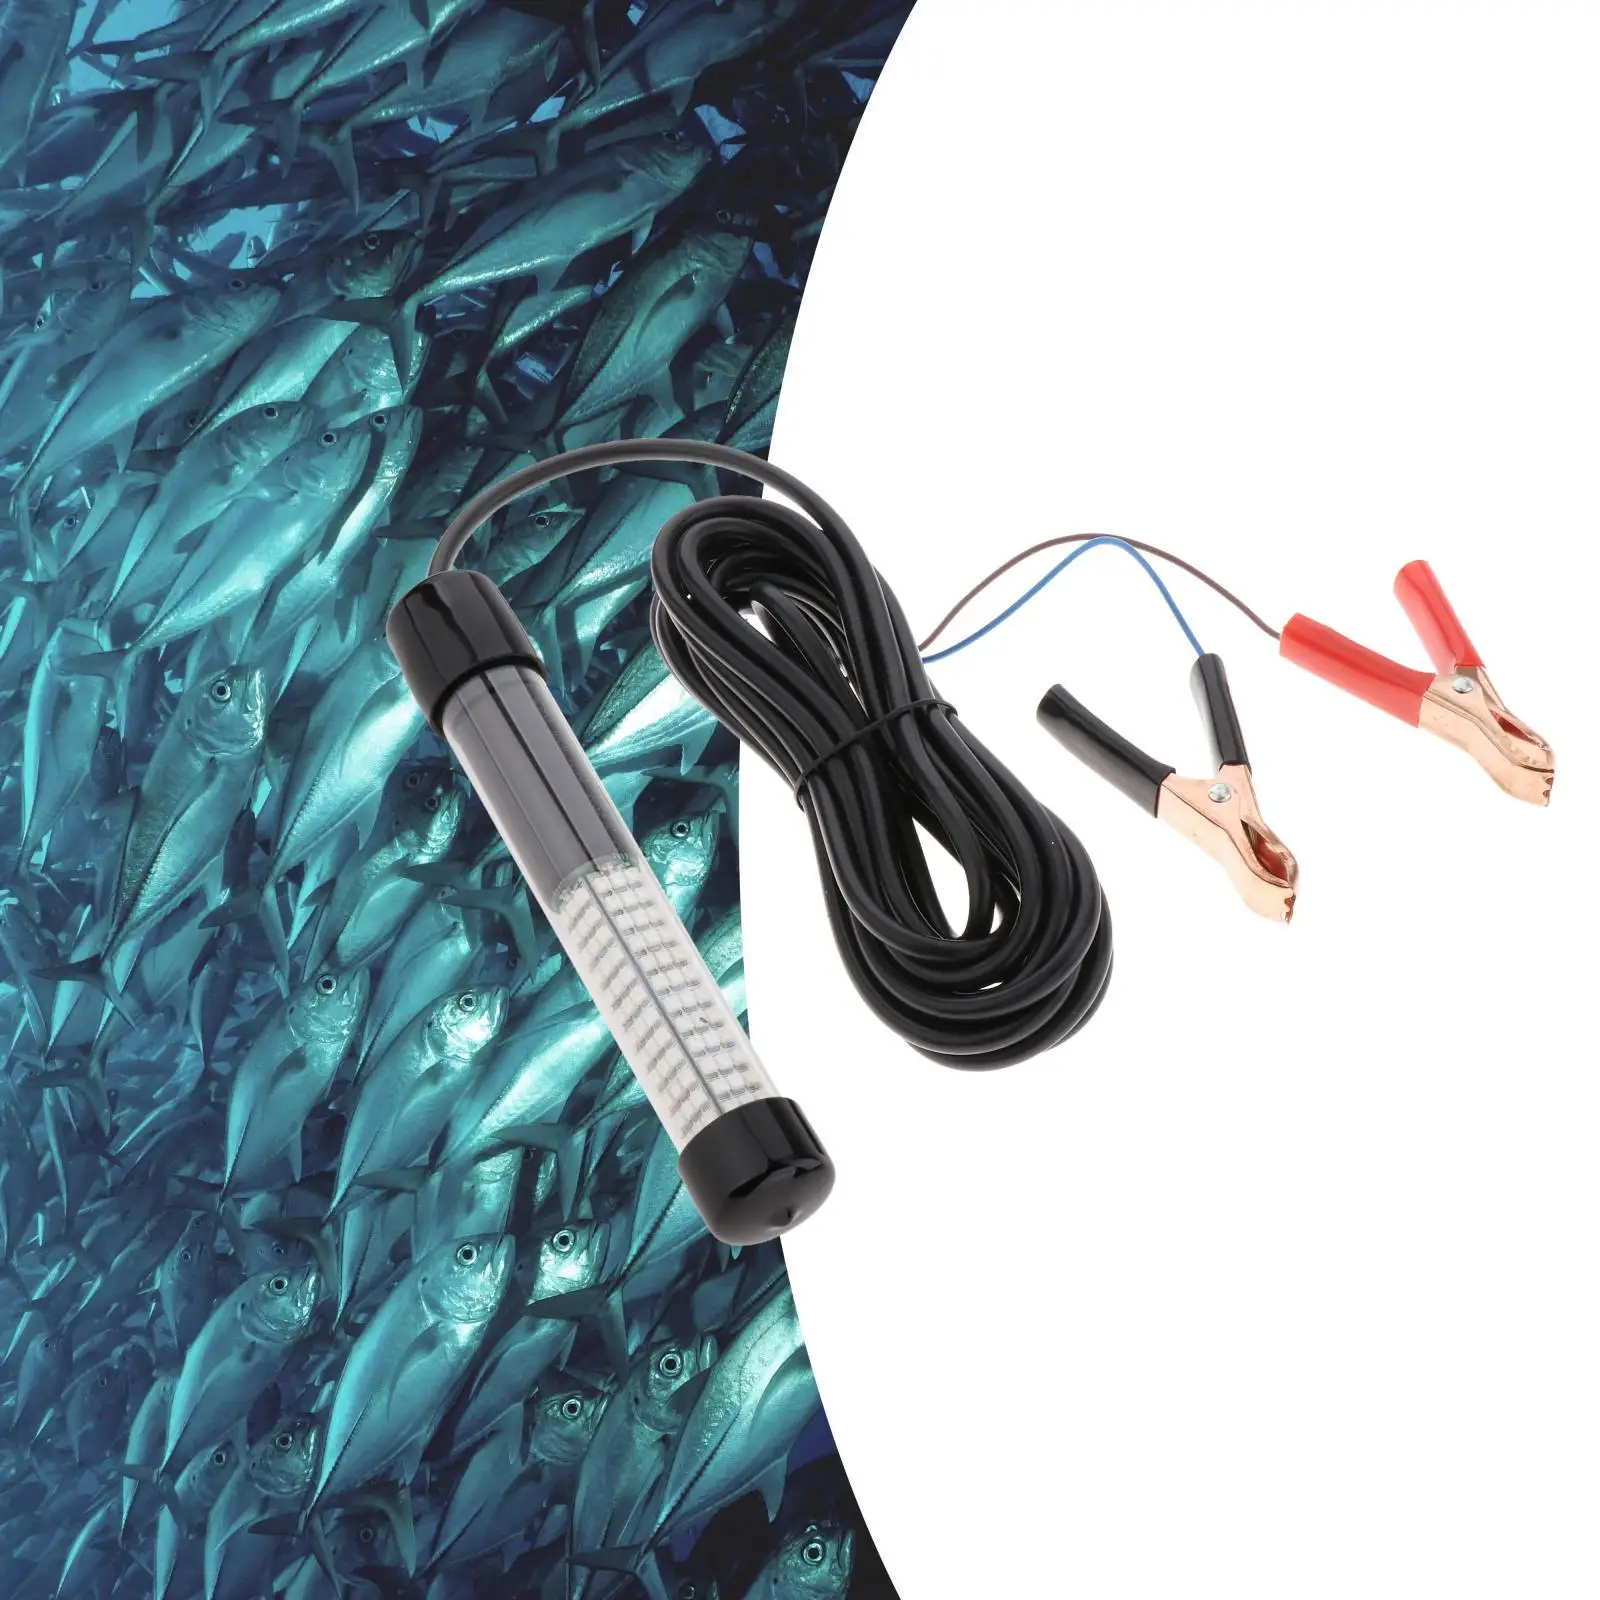 LED Submersible Fishing Light Portable 5M Cord Waterproof Water 20W Fishes Finder Lamp Saltwater Sea Fishing